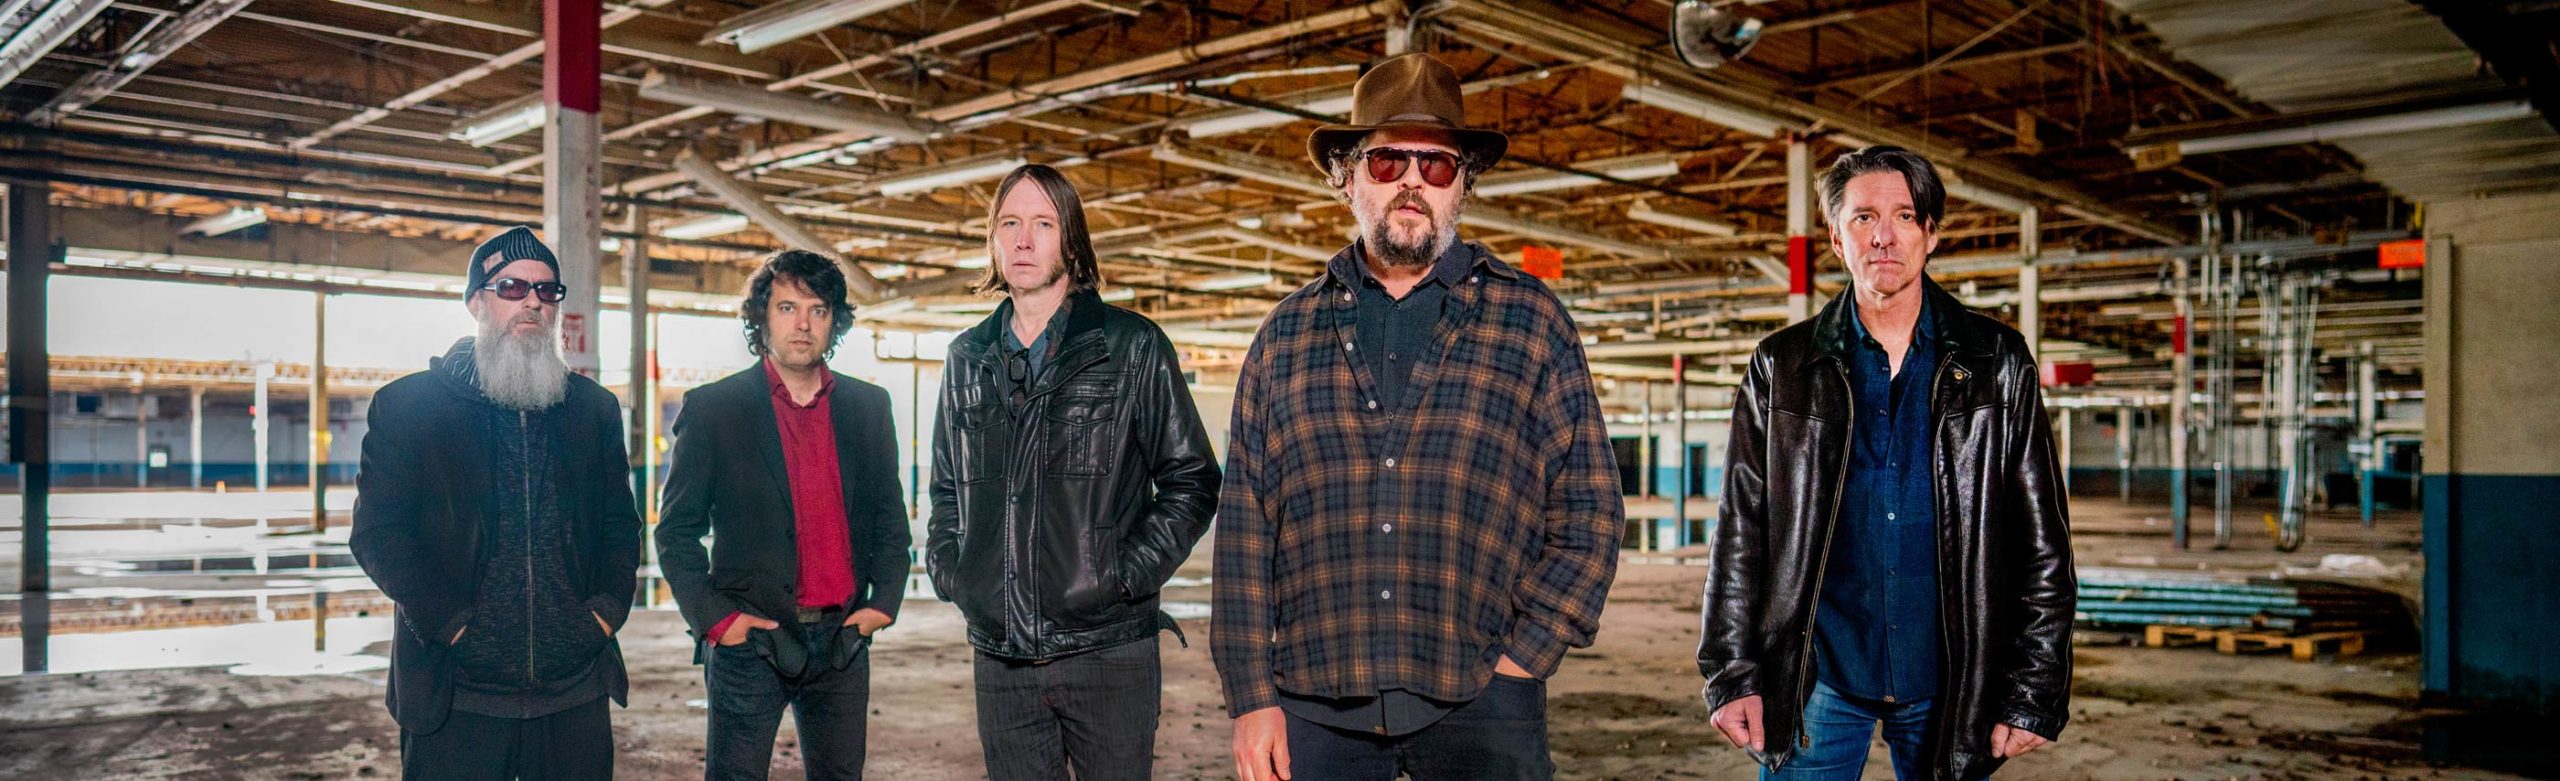 Alt-Country Mainstay Drive-By Truckers Will Headline The ELM with Ryley Walker Image